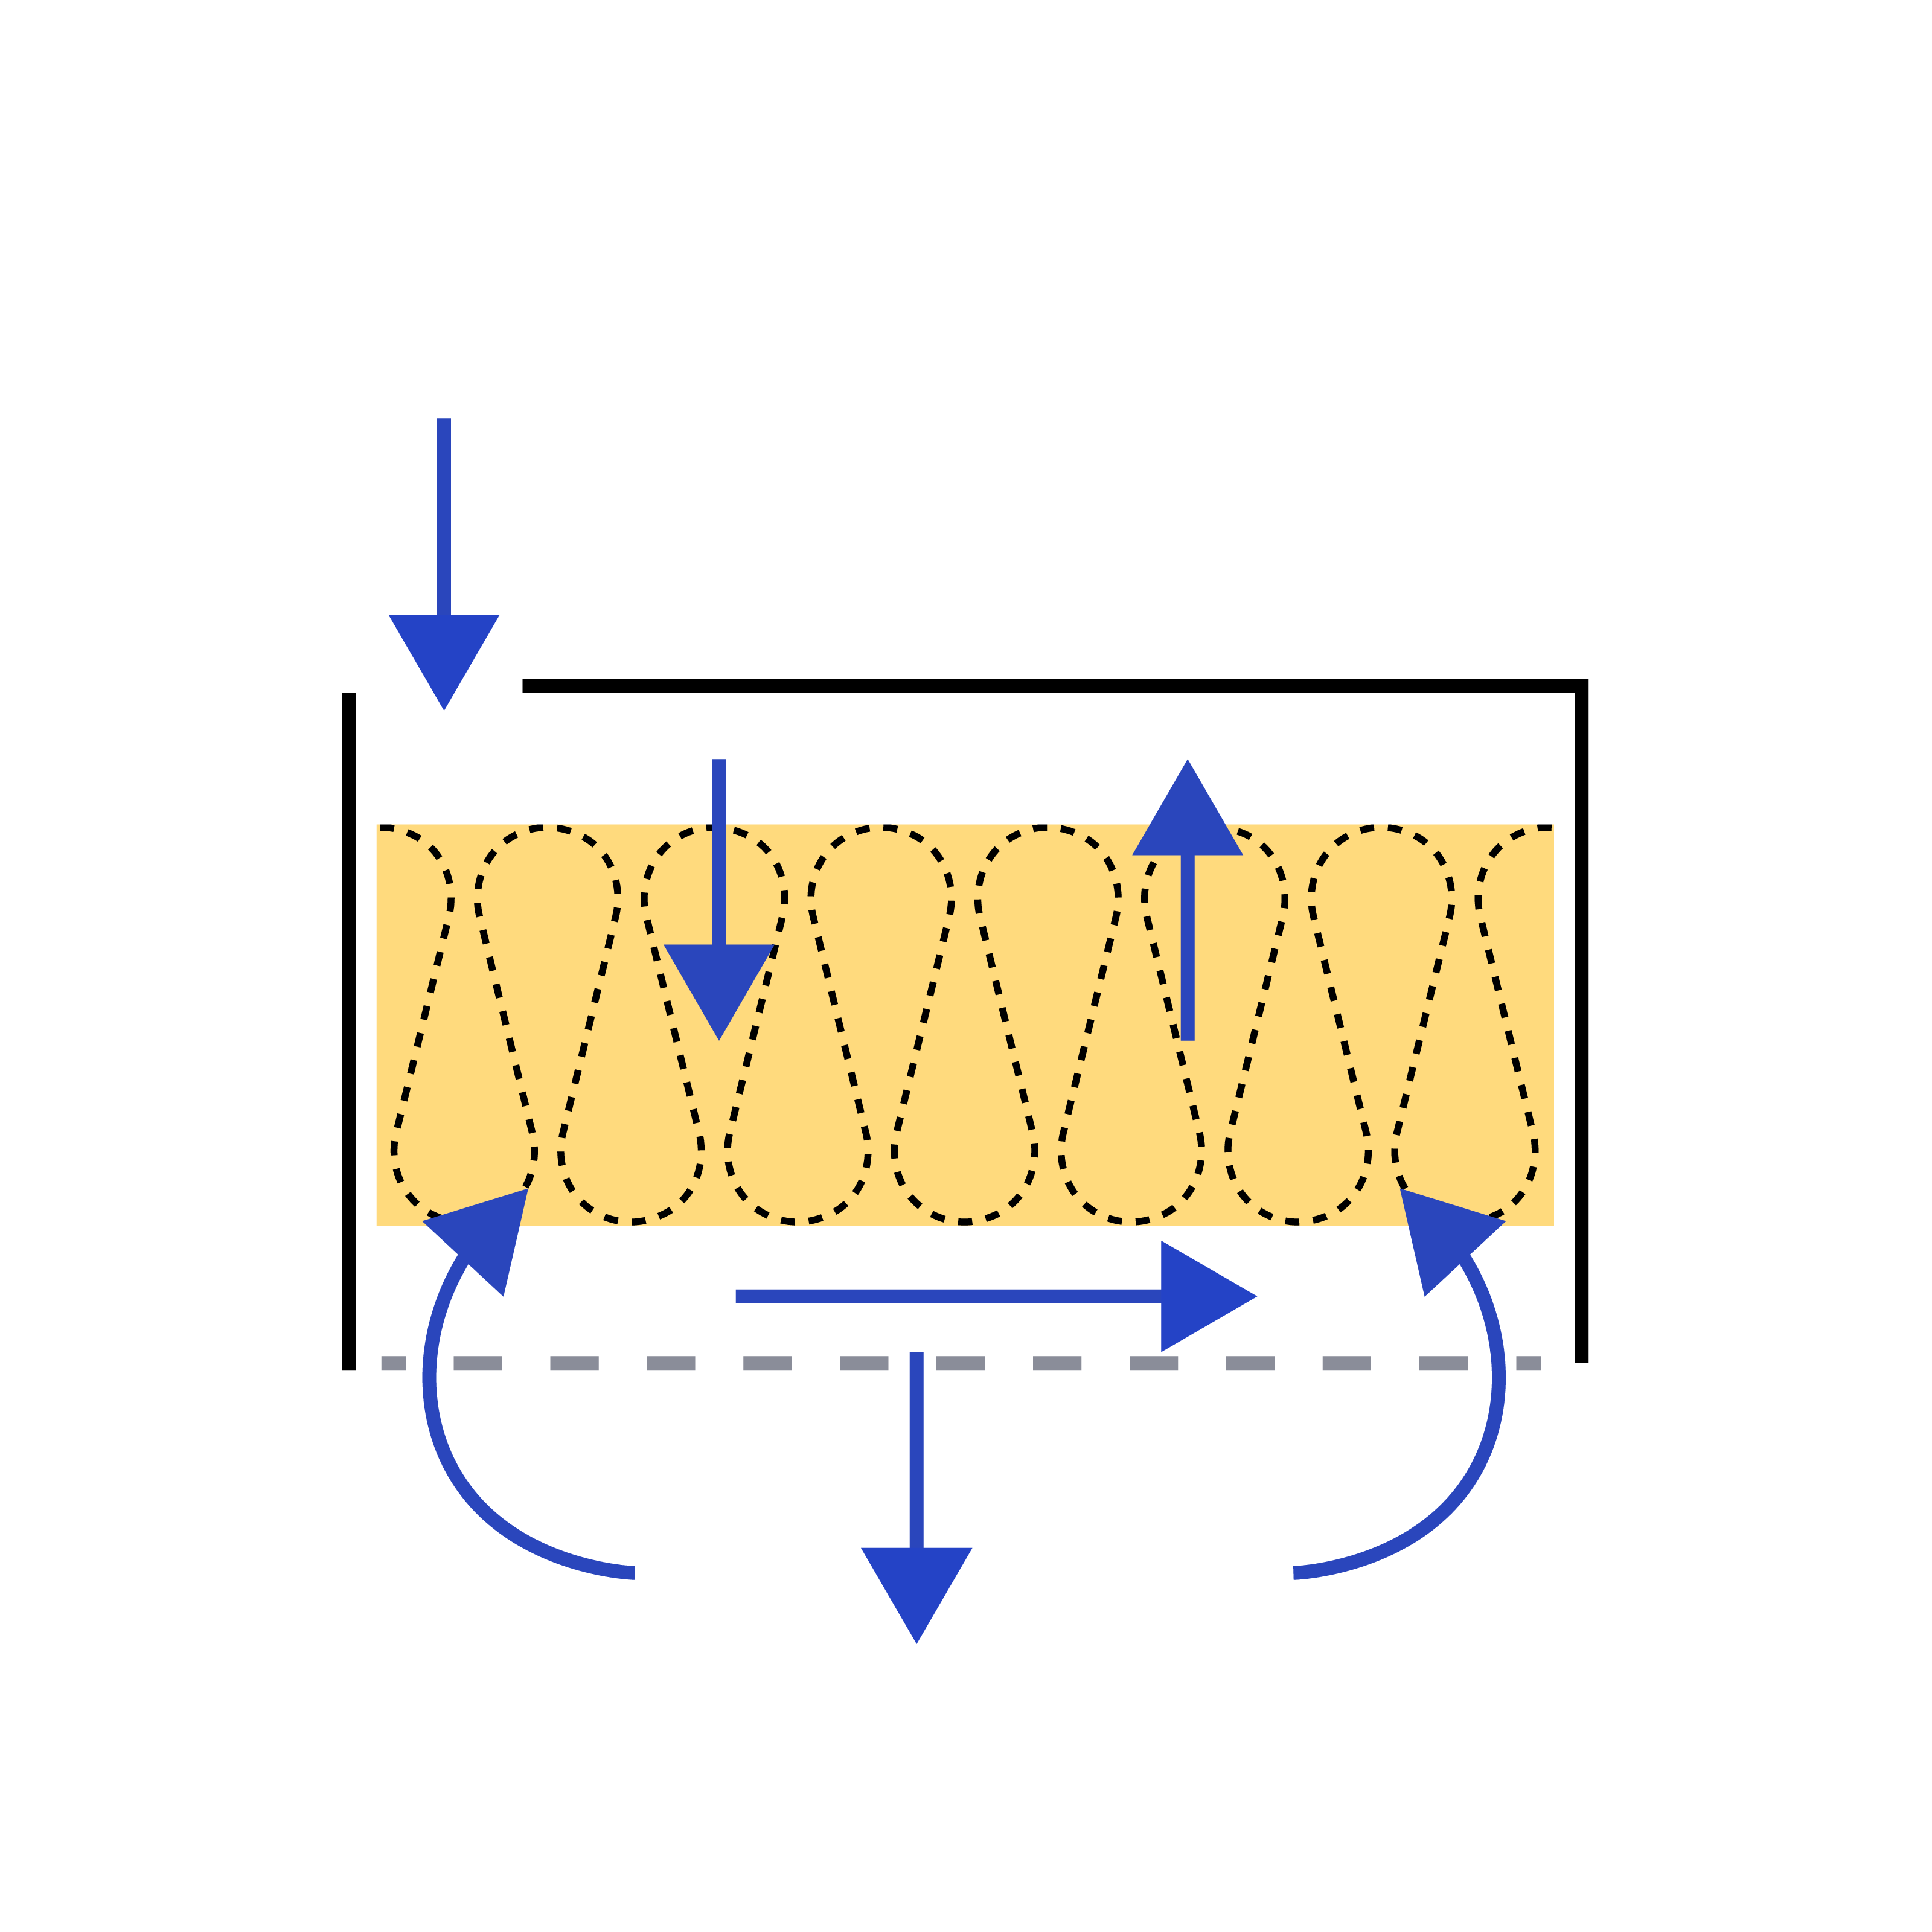 Diagram of how heat loss occurs when flexible insulation is installed without membranes